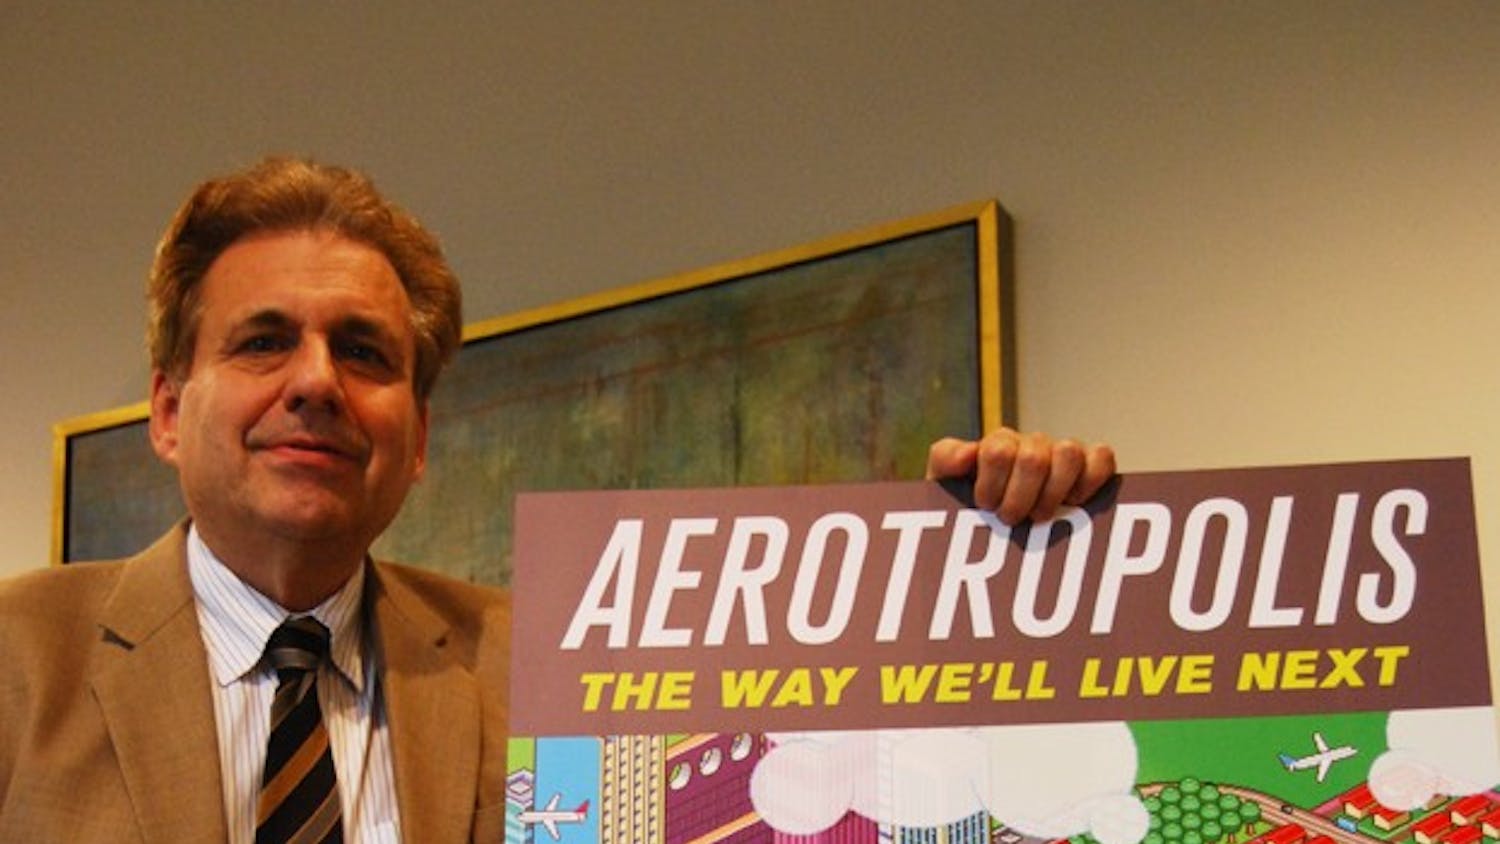 Dr. John D. Kasarda, author of "Aerotropolis" and Director of the Kenan Institute of Private Enterprise, has published more than 100 articles and nine books on airport cities, aviation infrastructure, and economic development. He coined the term 'aerotropolis,' which stresses placing airports in the center with cities growing around them. Recently, he was cited in Times Magazine's article on '10 Ideas that will Change the World.' 